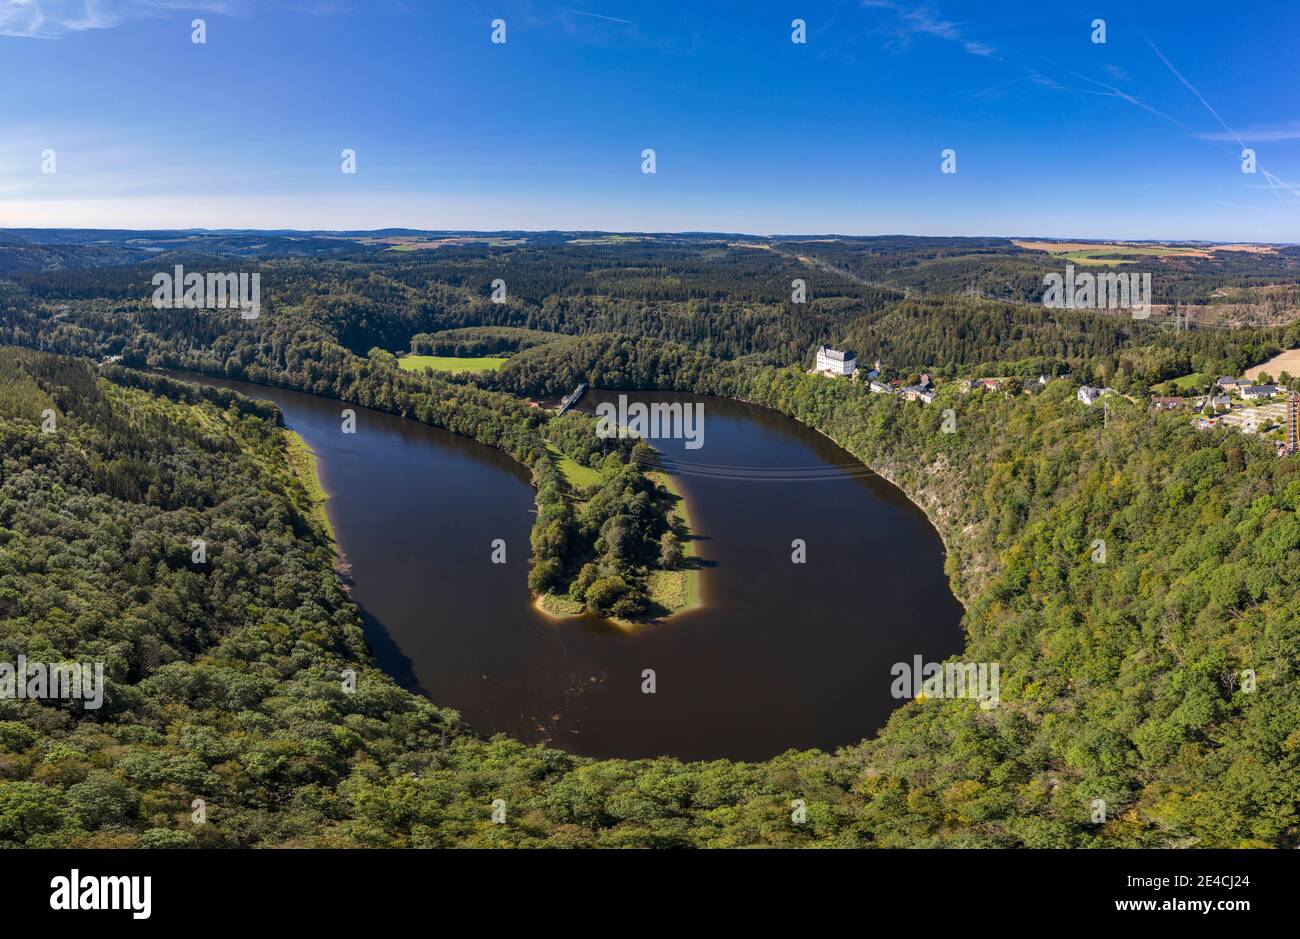 Germany, Thuringia, Schleiz, Burgk, Burgkhammer, dam, dam, forest, castle,  river bend, aerial view, panorama Stock Photo - Alamy